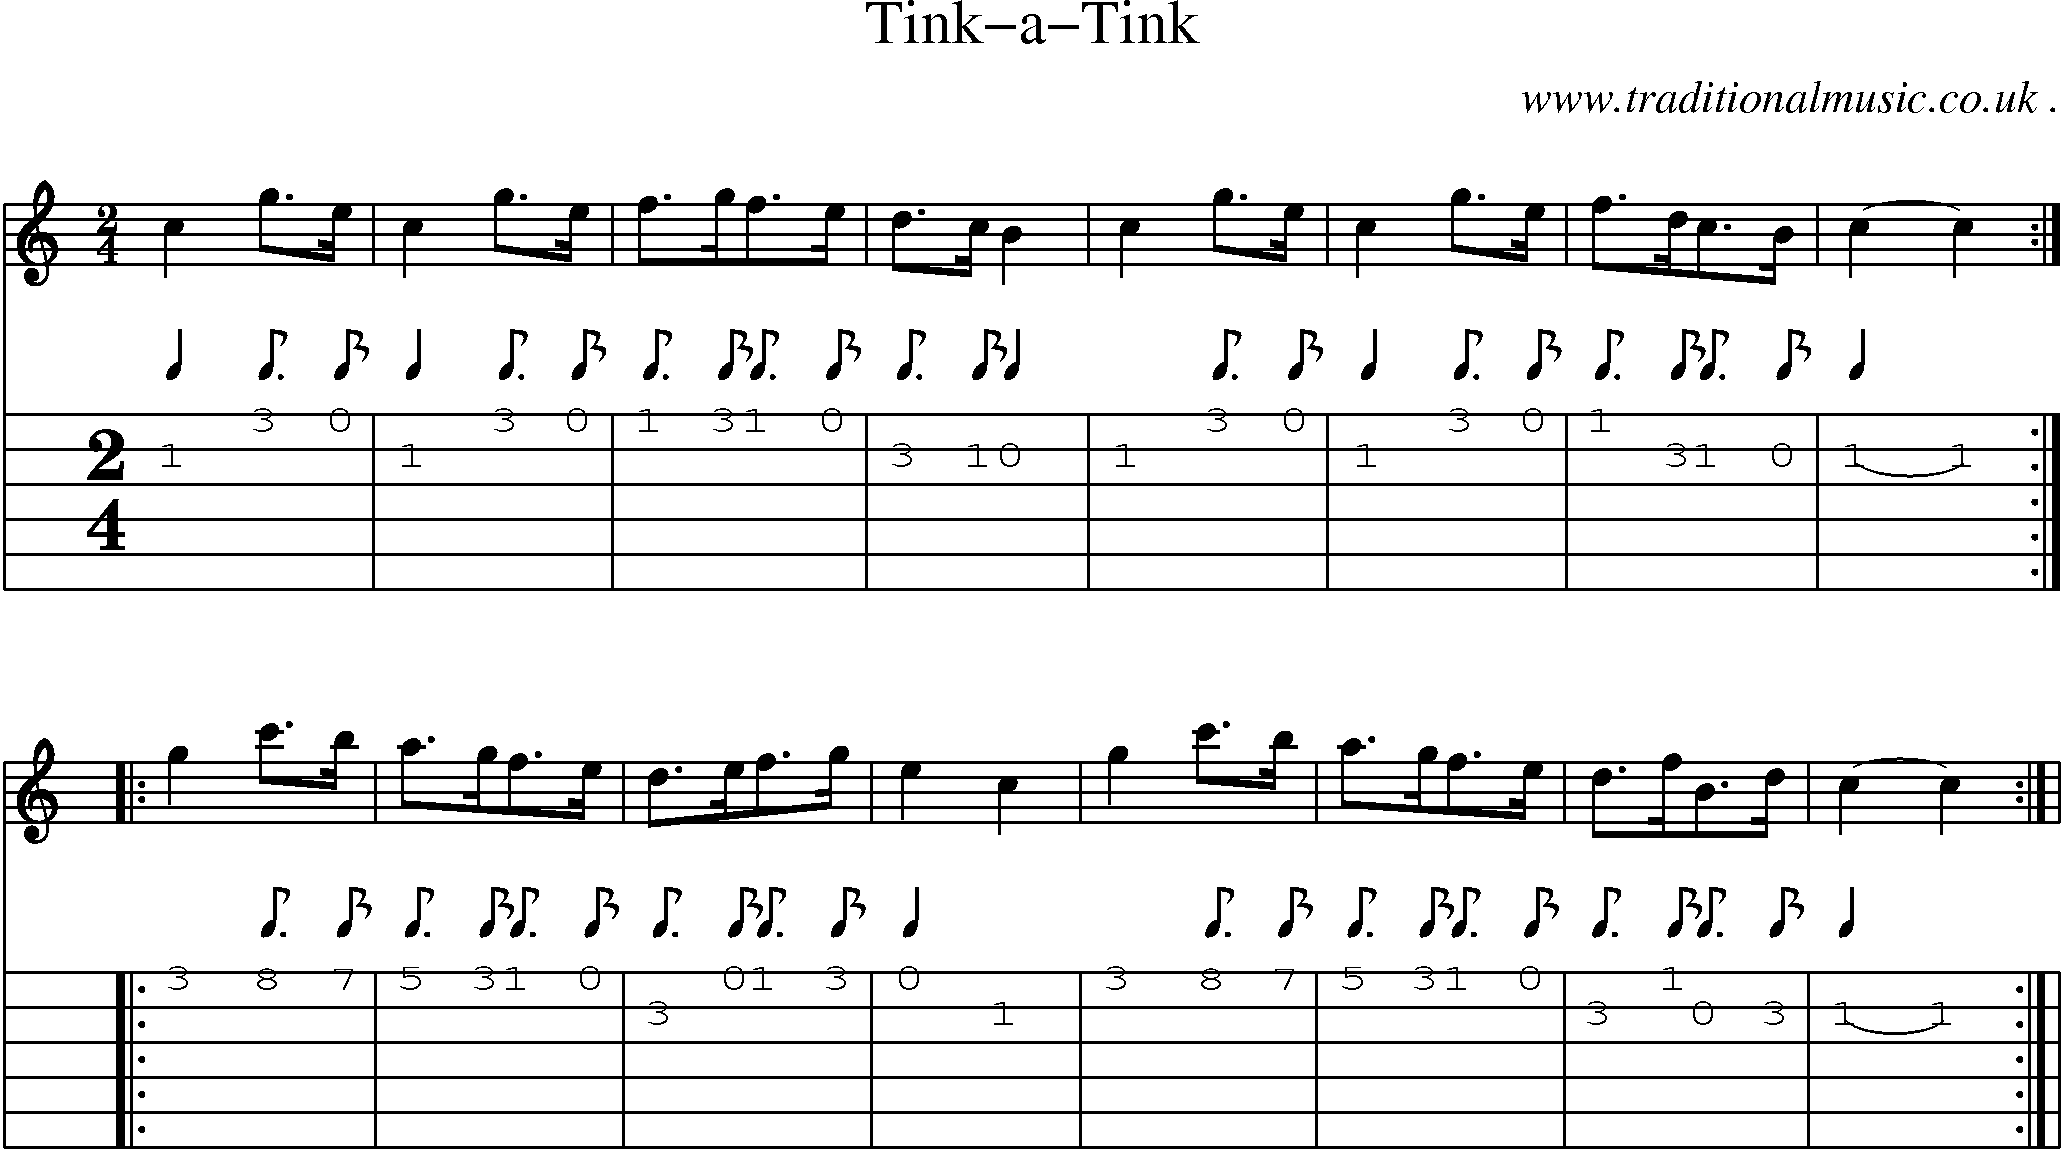 Sheet-Music and Guitar Tabs for Tink-a-Tink 